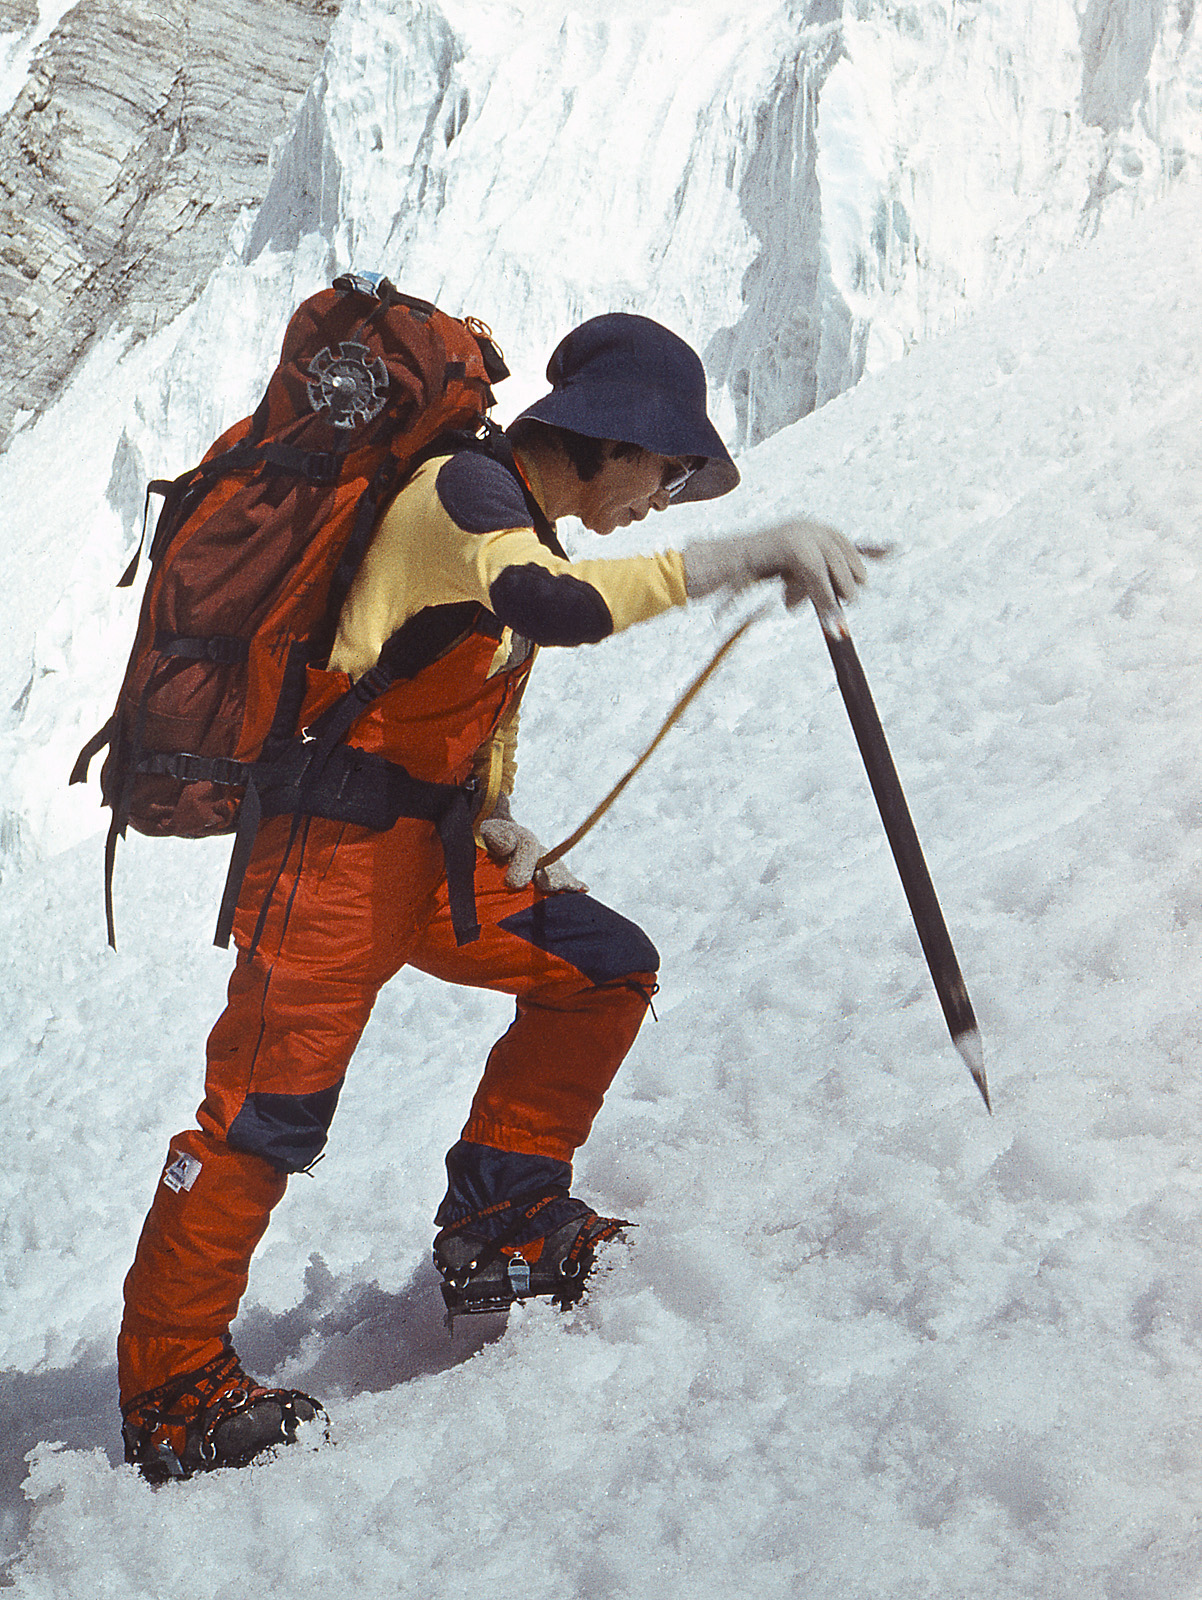 1975 Junko Tabei becomes the first woman to conquer Mount Everest